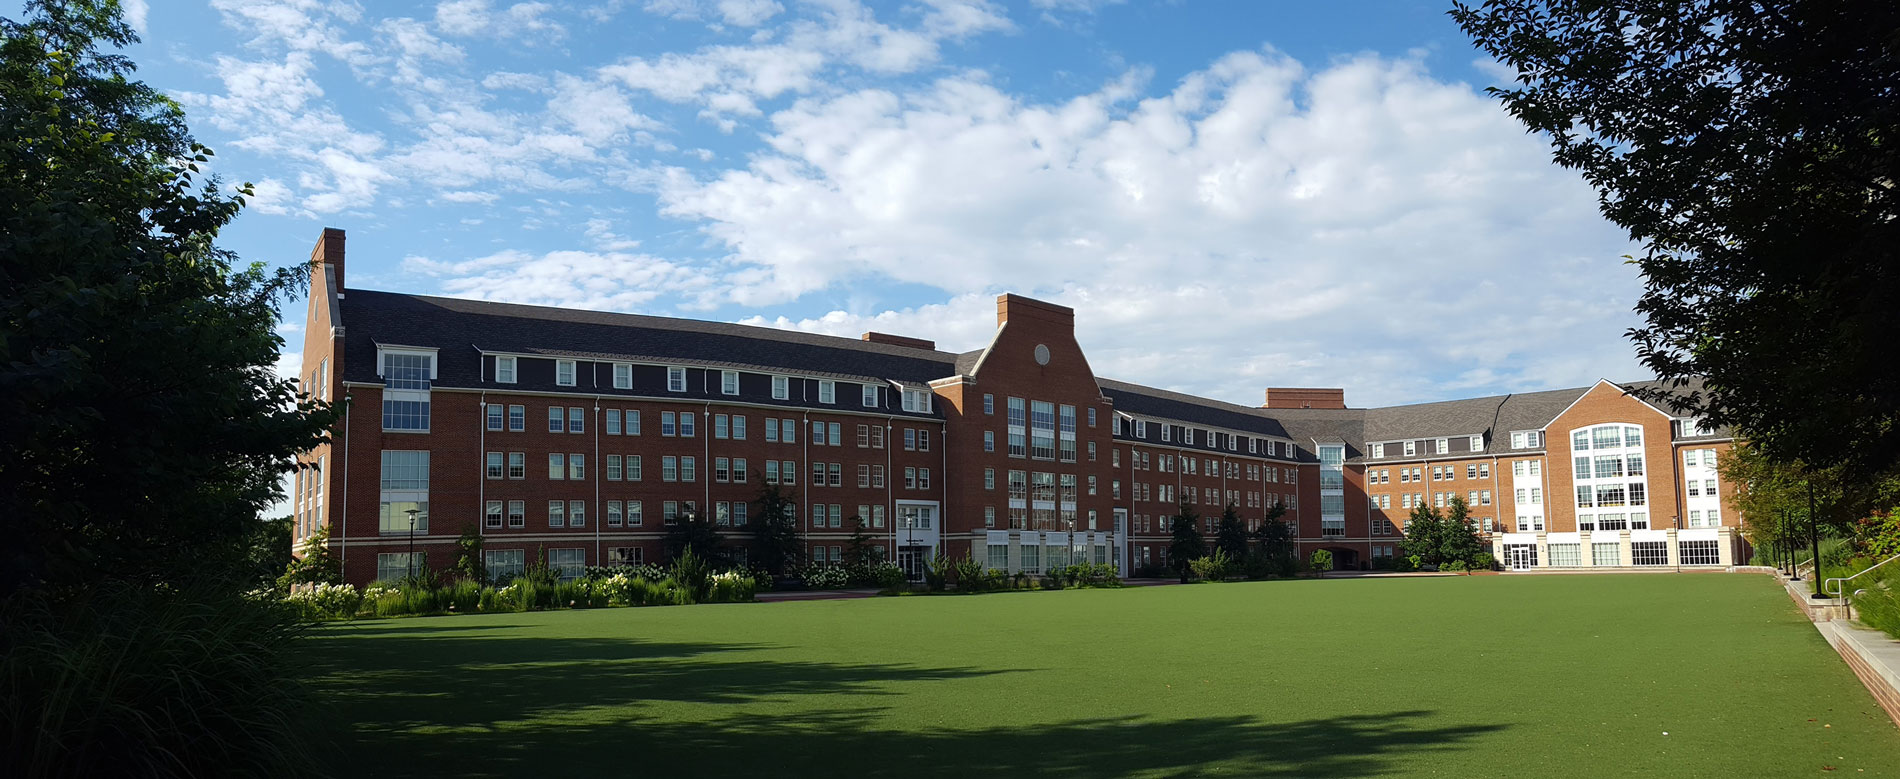 Exterior of Independence residence hall